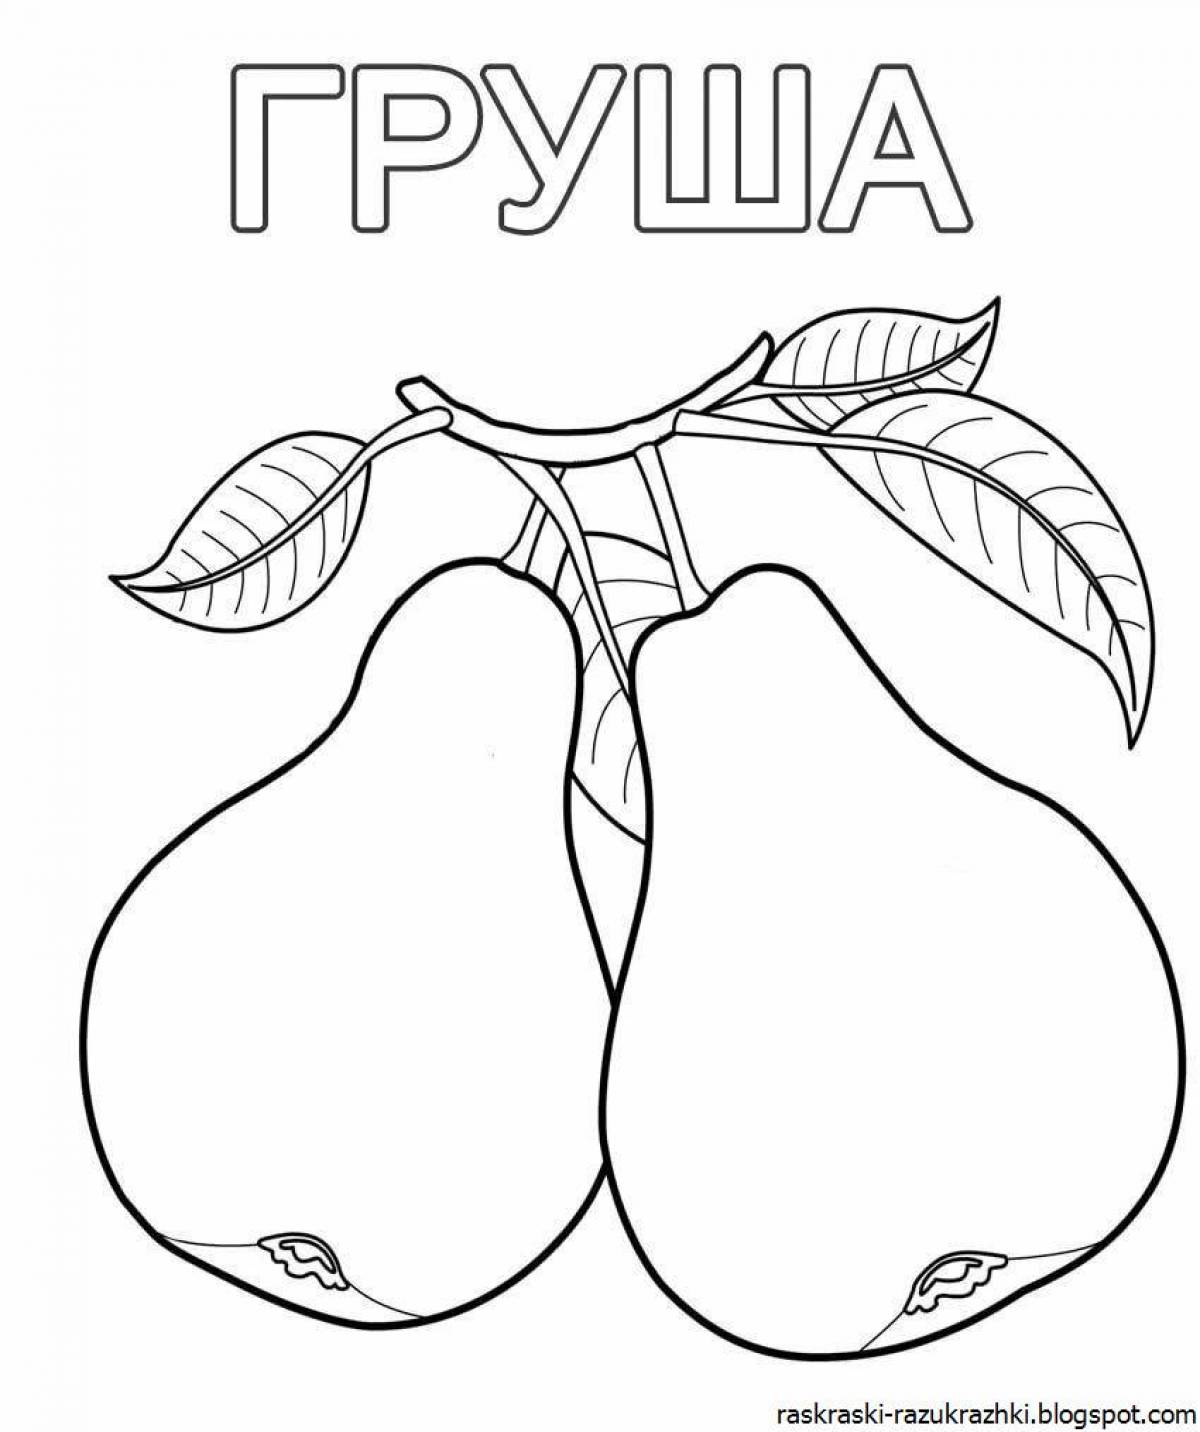 Fun fruits and vegetables coloring pages for kids